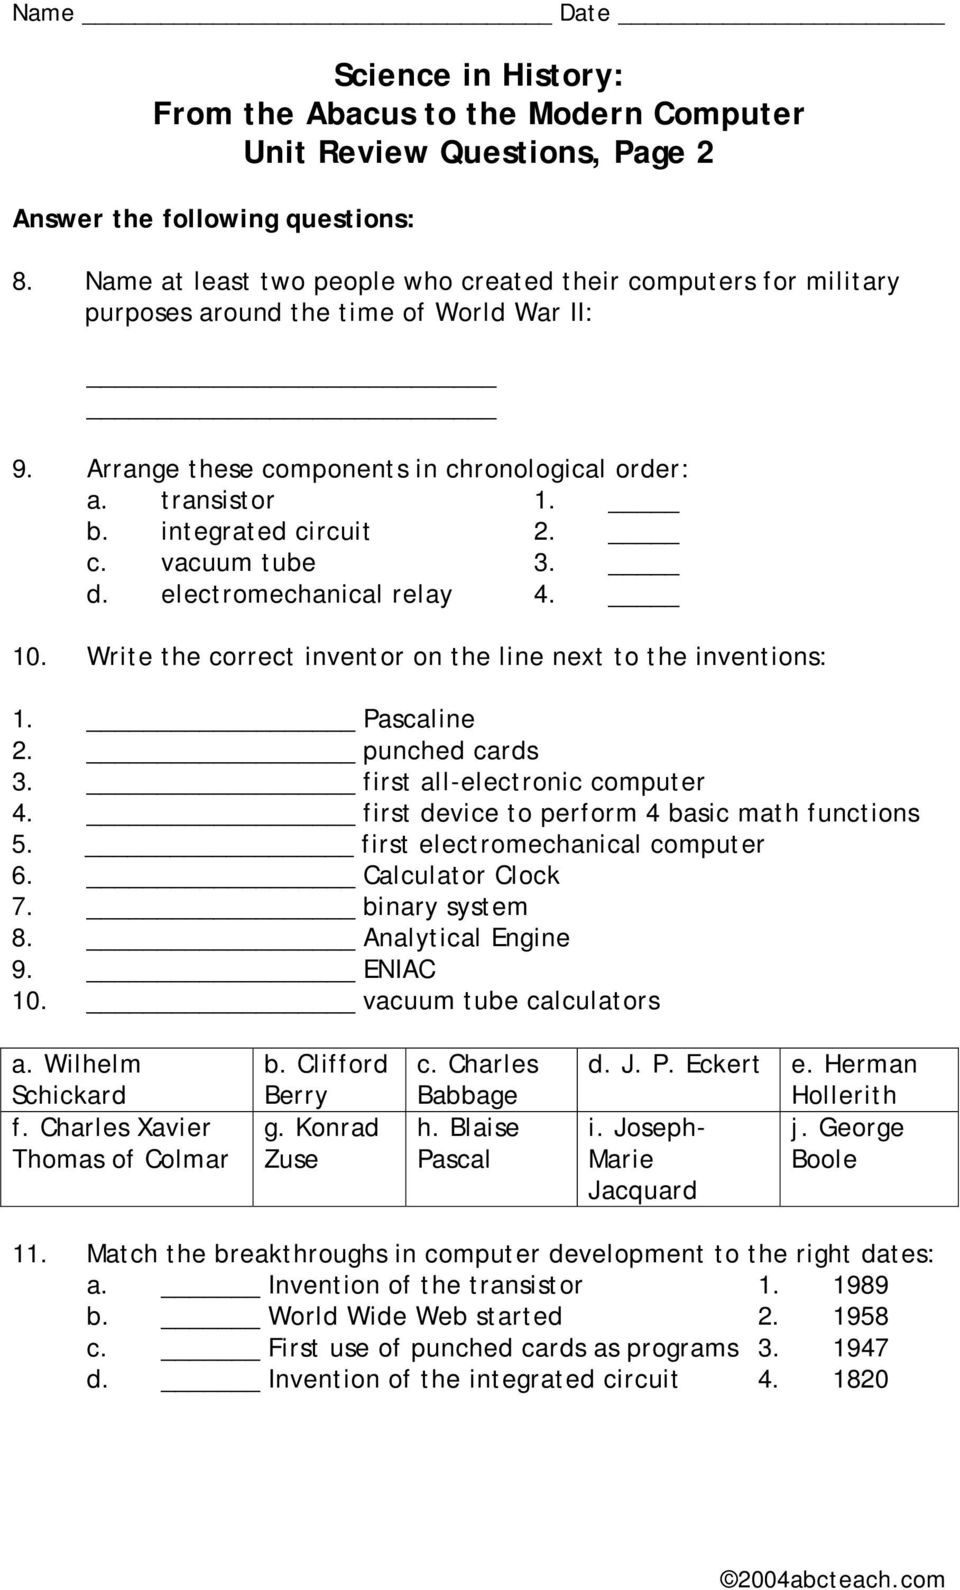 Write the correct inventor on the line next to the inventions: 1. Pascaline 2. punched cards 3. first all-electronic computer 4. first device to perform 4 basic math functions 5.